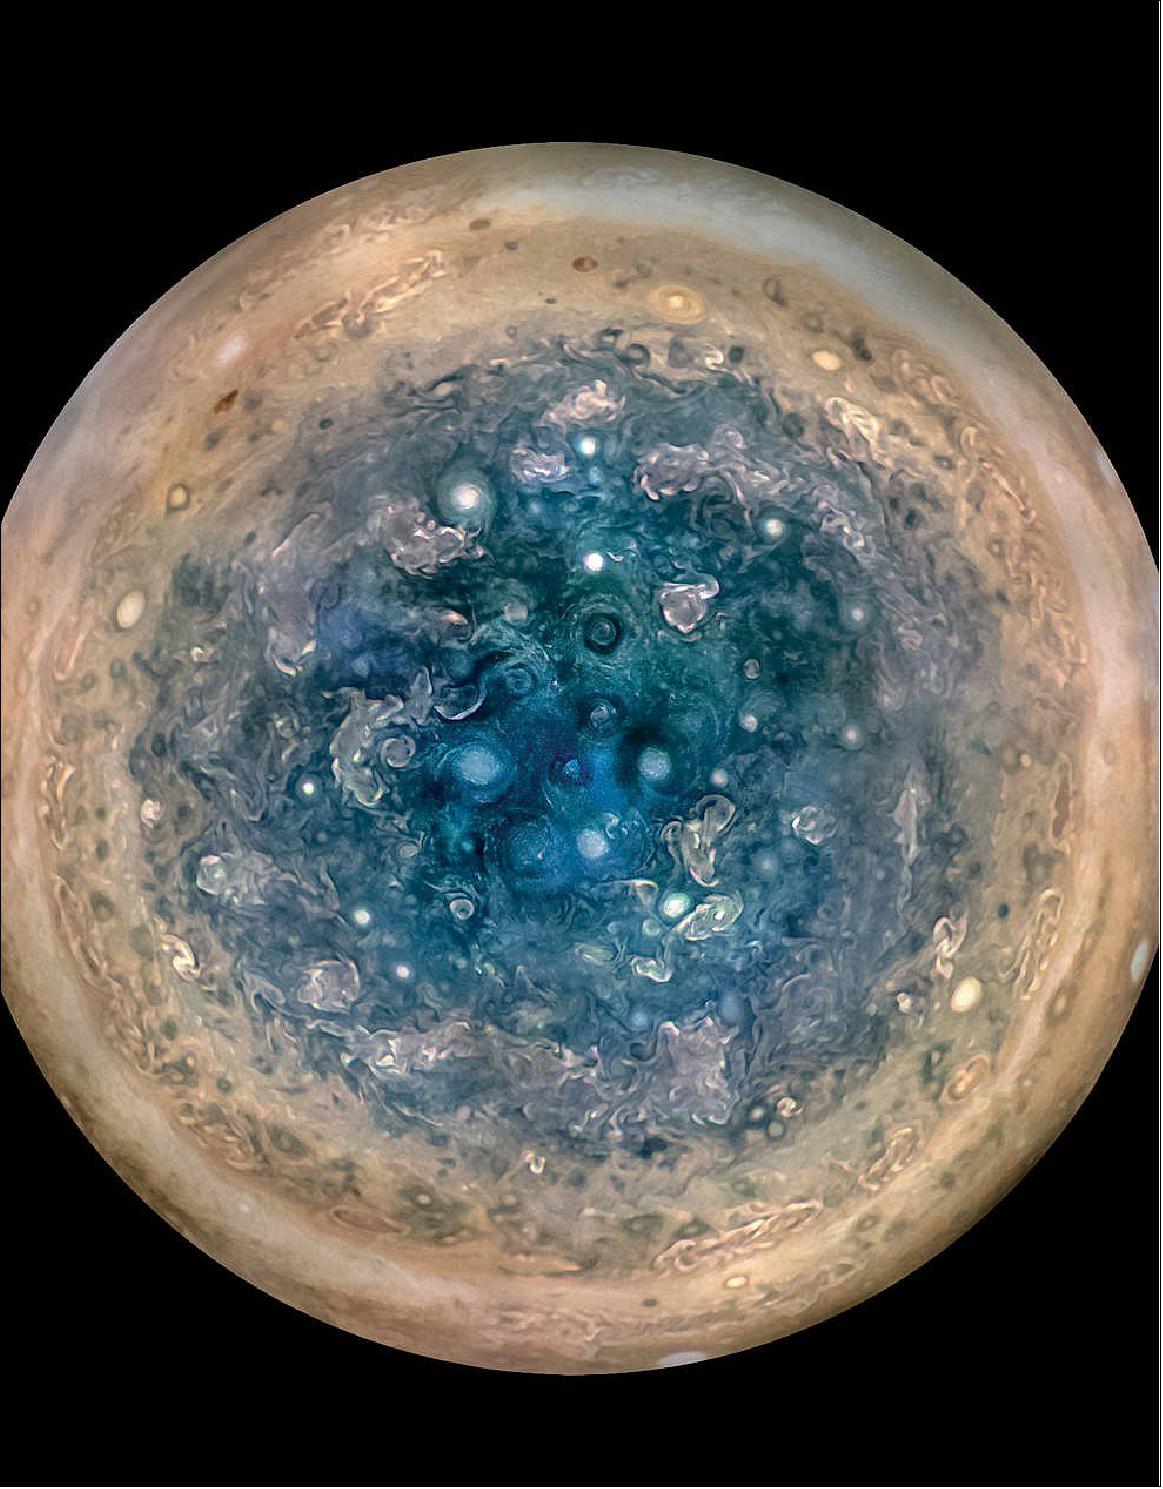 Figure 47: This image shows Jupiter's south pole, as seen by NASA's Juno spacecraft from an altitude of 32,000 miles (52,000 kilometers). The oval features are cyclones, up to 600 miles (1,000 kilometers) in diameter. Multiple images taken with the JunoCam instrument on three separate orbits were combined to show all areas in daylight, enhanced color, and stereographic projection (image credits: NASA/JPL-Caltech/SwRI/MSSS/Betsy Asher Hall/Gervasio Robles)